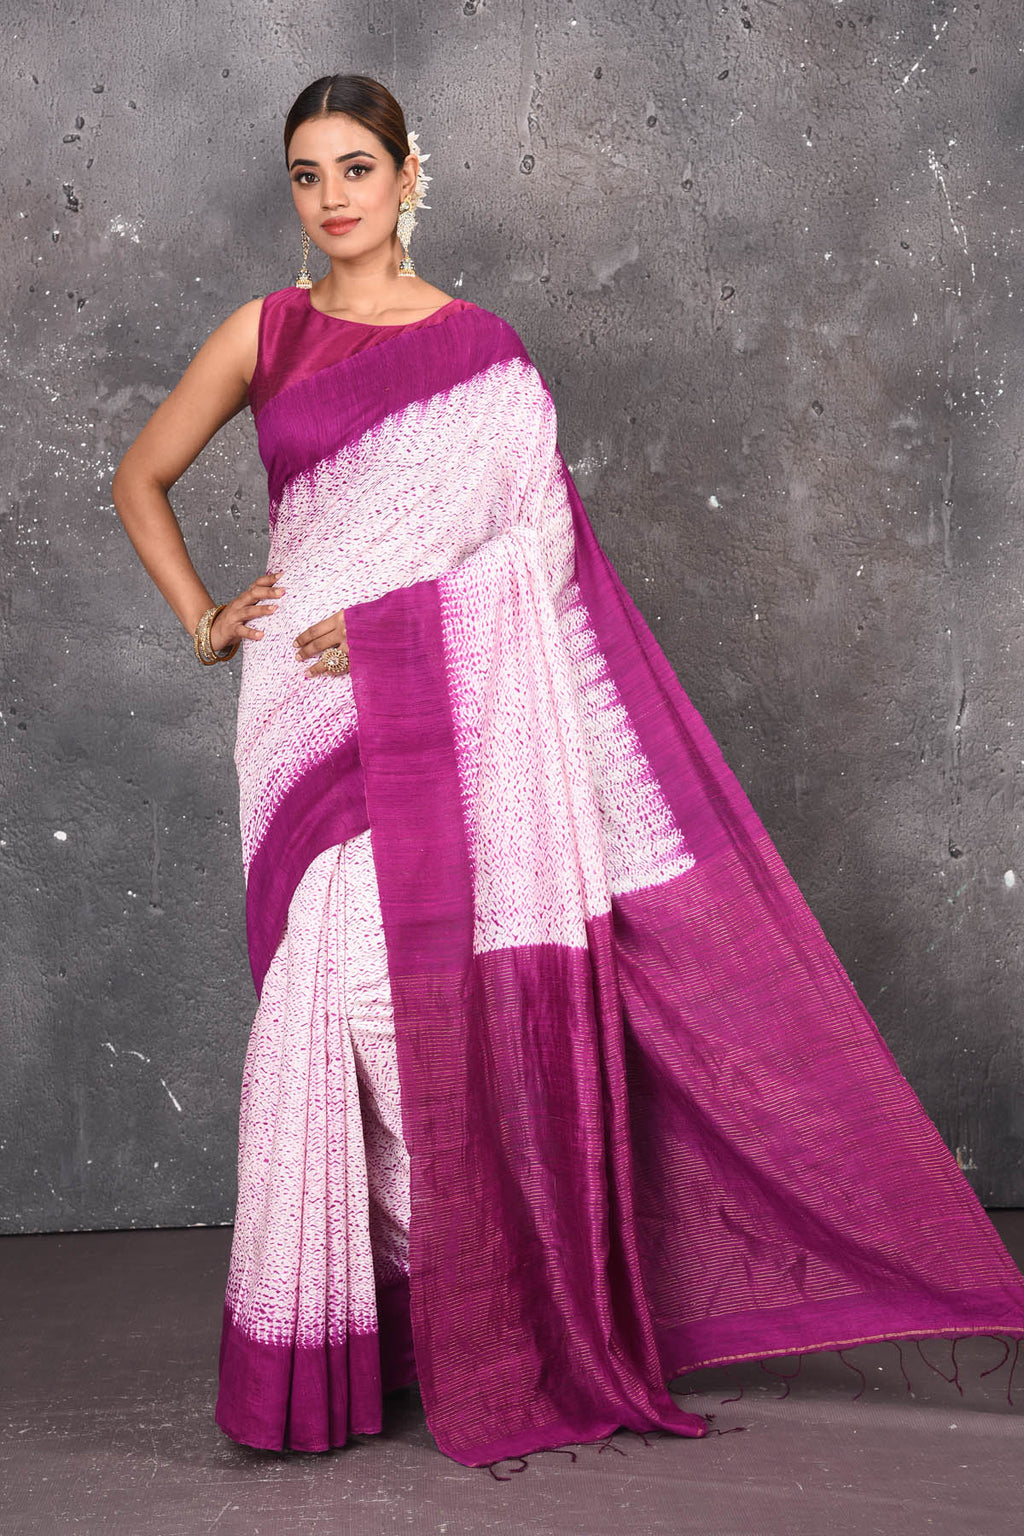 Shop this elegant offwhite-purple handloom shibori tussar saree online in USA which is handcrafted from fine silk tussar fabric, this tie and dye saree brings out the nature of flow. You can pair this beautiful shibori print with minimal jewellery for a casual day outfit. Add this plain shibori saree to your collection from Pure Elegance Indian fashion store in USA.- Full view.